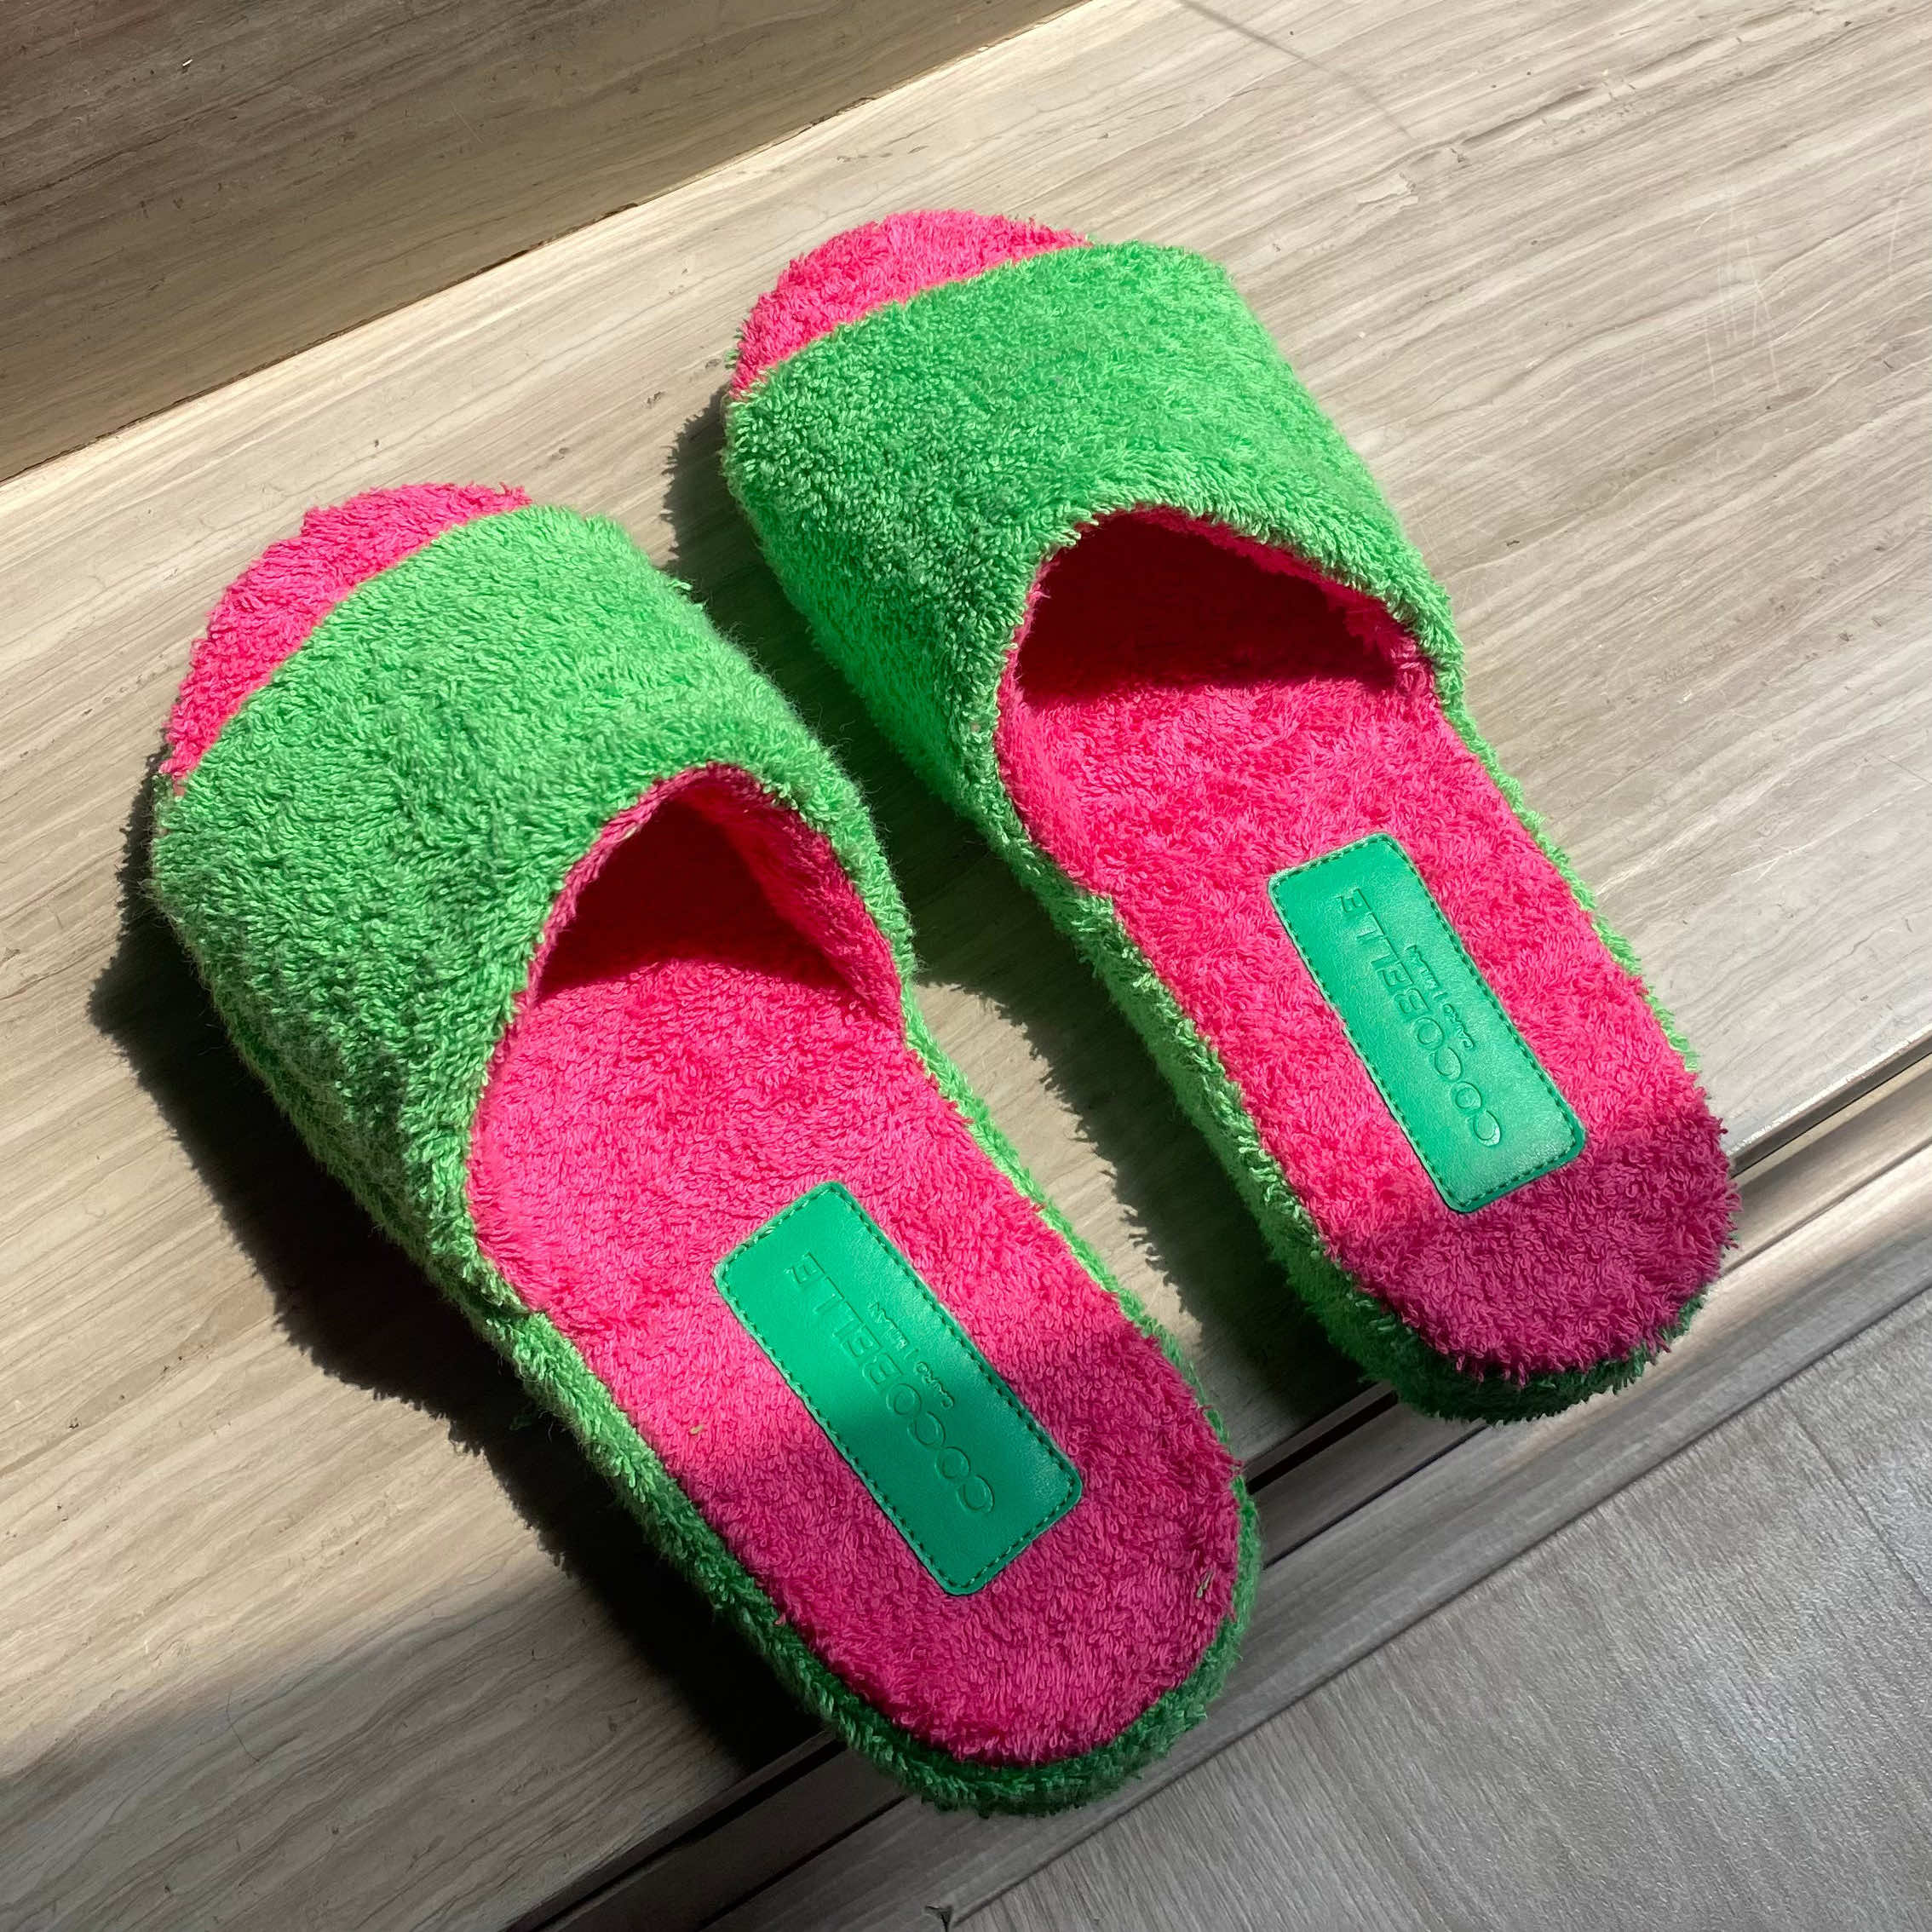 Terry Towel Slides in So Green & Pink Funk